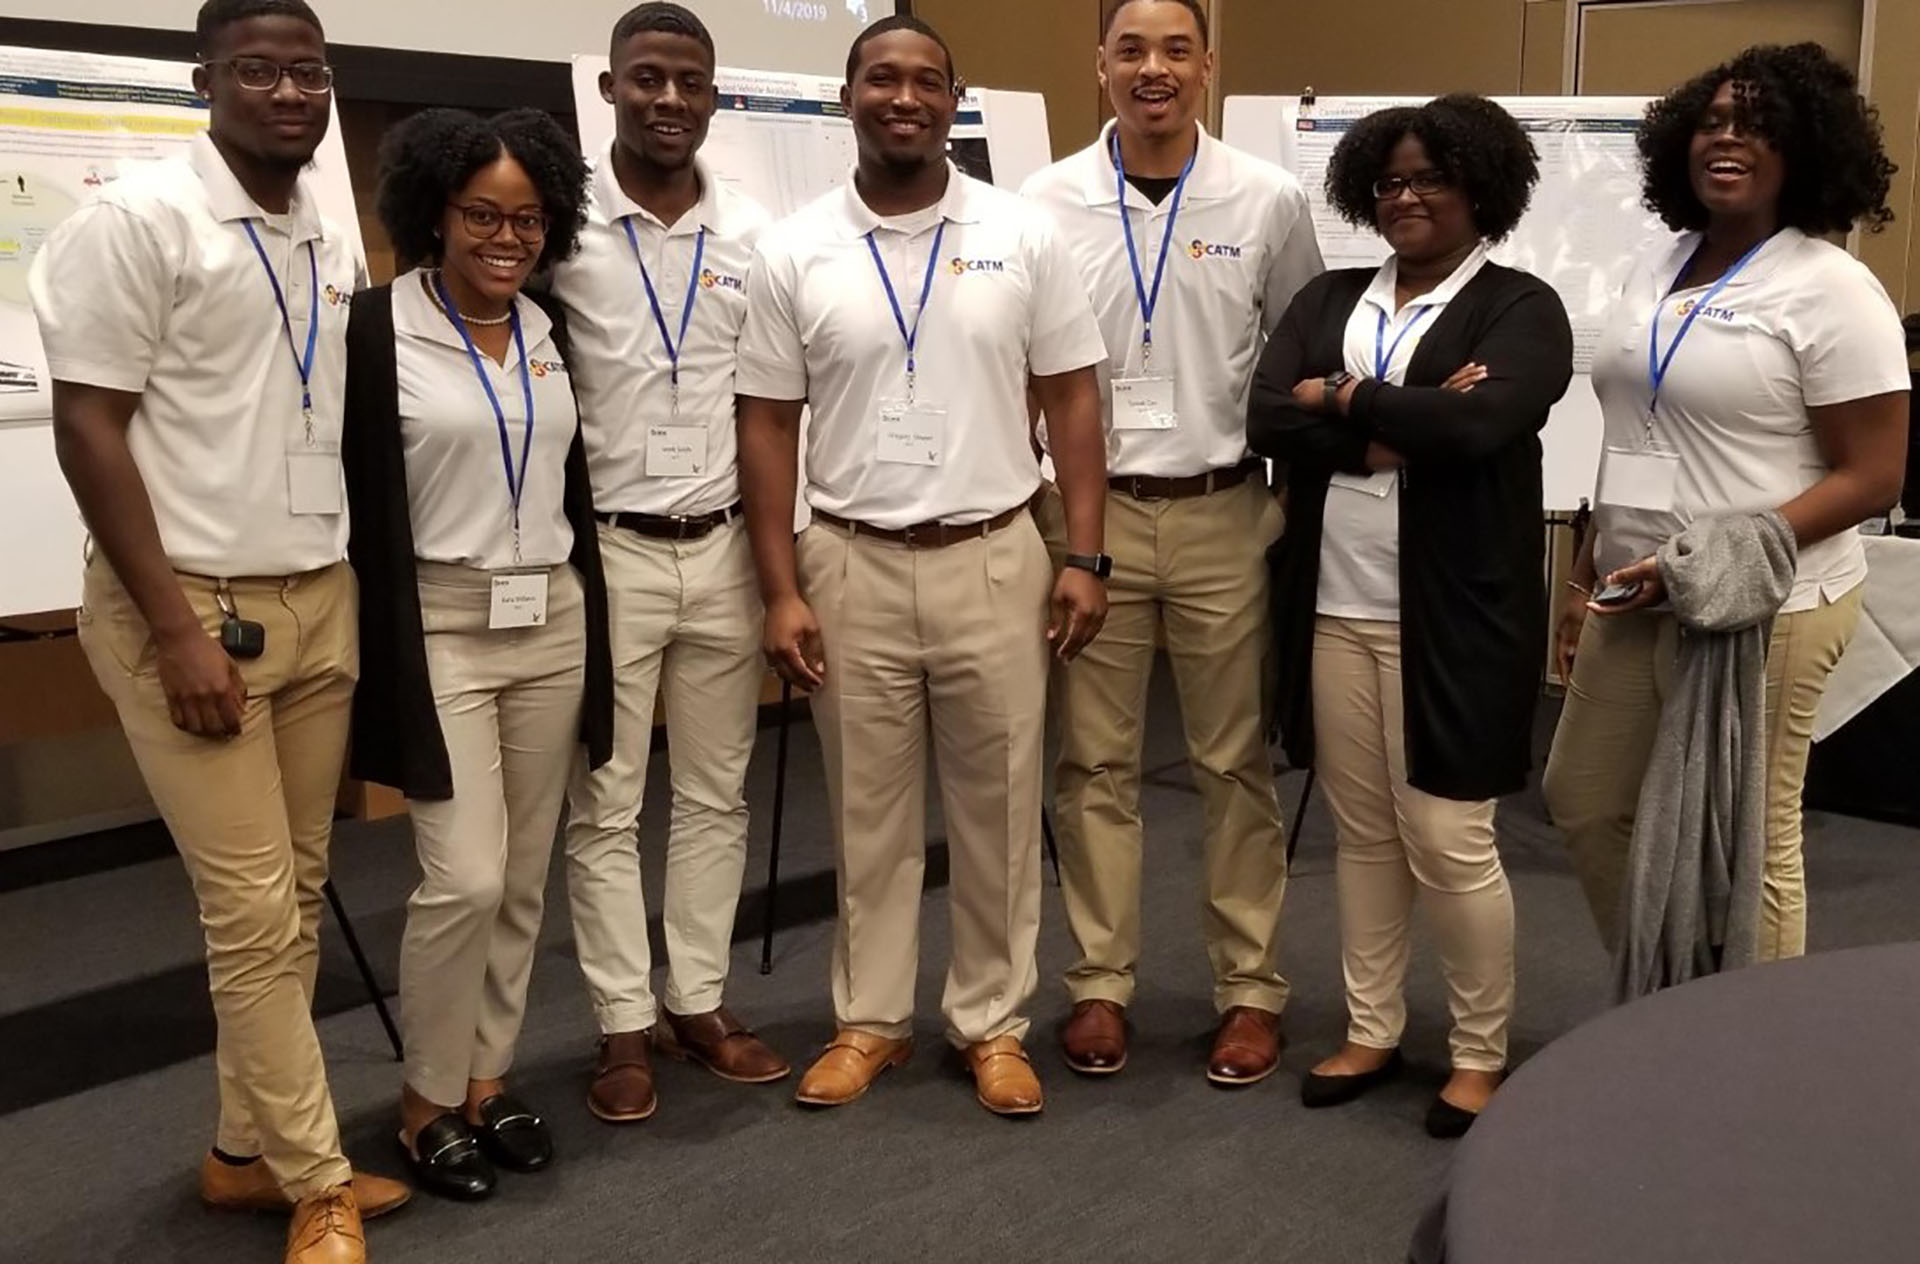 On Nov. 4, seven N.C. A&T students attended the third annual CATM Symposium held at EmbryRiddle Aeronautical University in Daytona Beach, Florida. From left: Joseph Smith, Kiana Williams, Jacob Smith, Gregory Stewart, Tyreak Carr, Aliya Mcray and Amanda Gray.